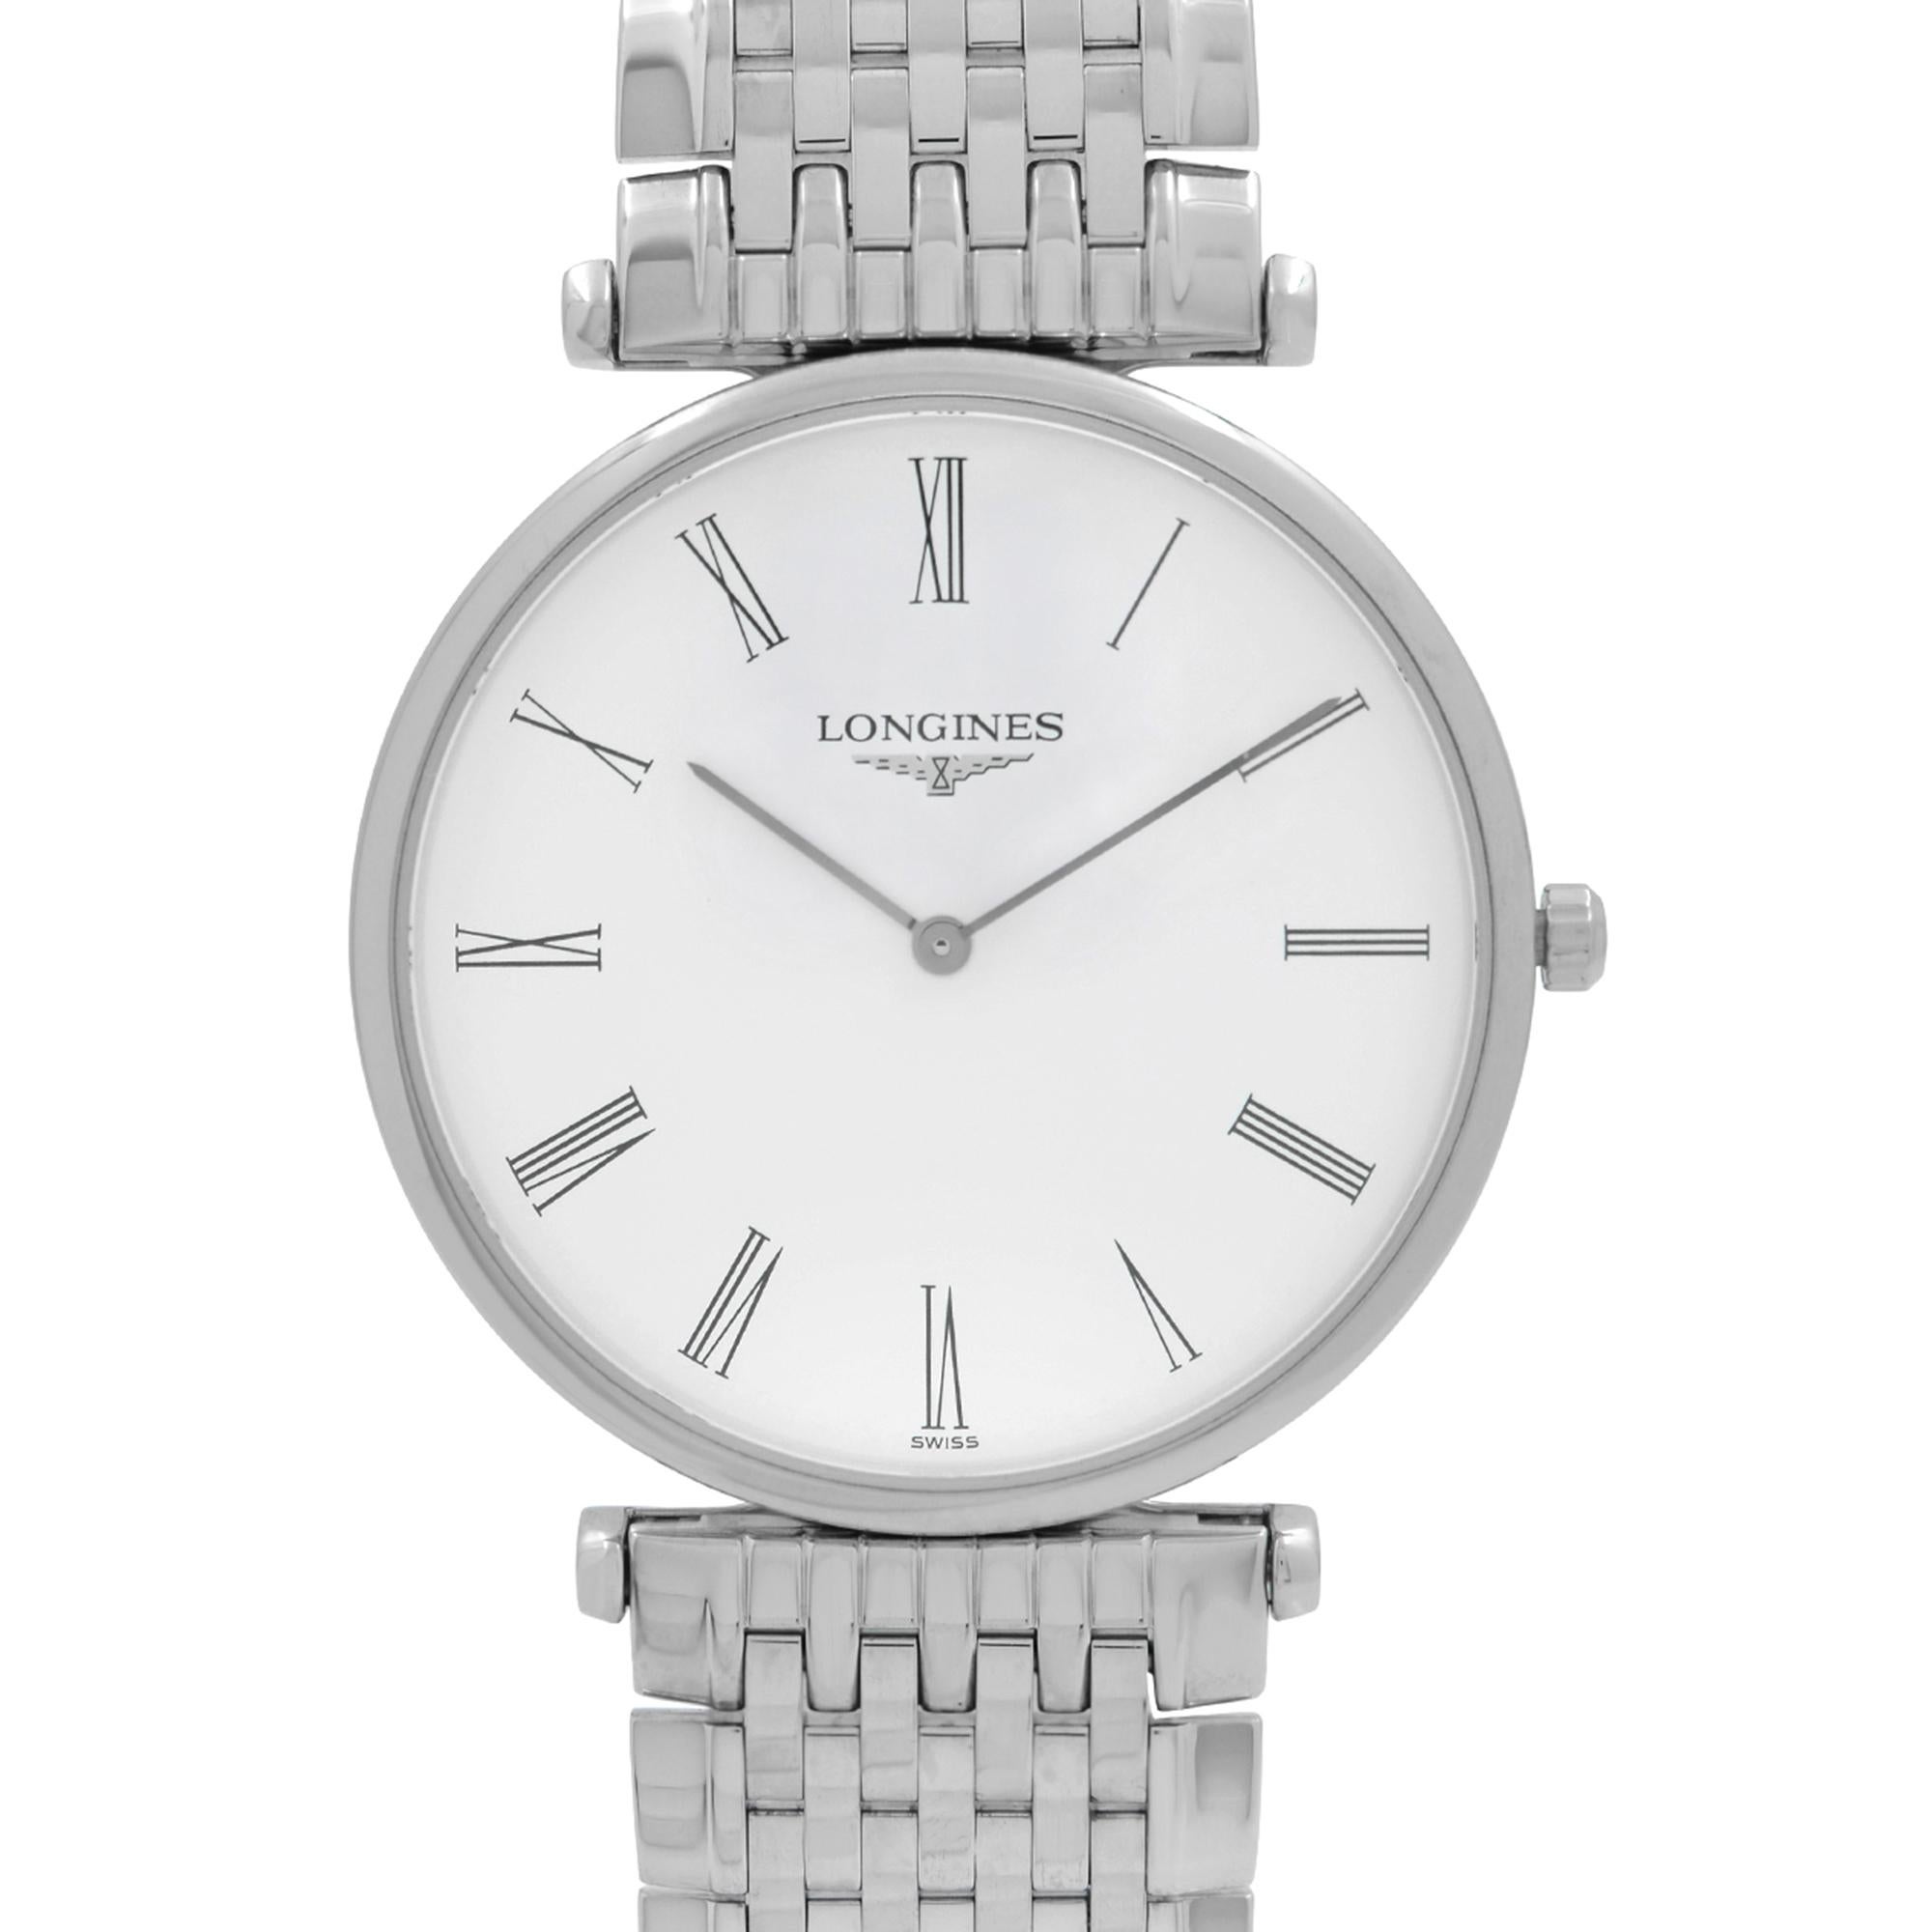 Display Model Longines La Grande Classique Stainless Steel White Roman Dial Quartz Mens Watch L4.709.4.11.6. This Beautiful Timepiece is Powered by Quartz (Battery) Movement And Features: Round Stainless Steel Case with a Stainless Steel Bracelet,